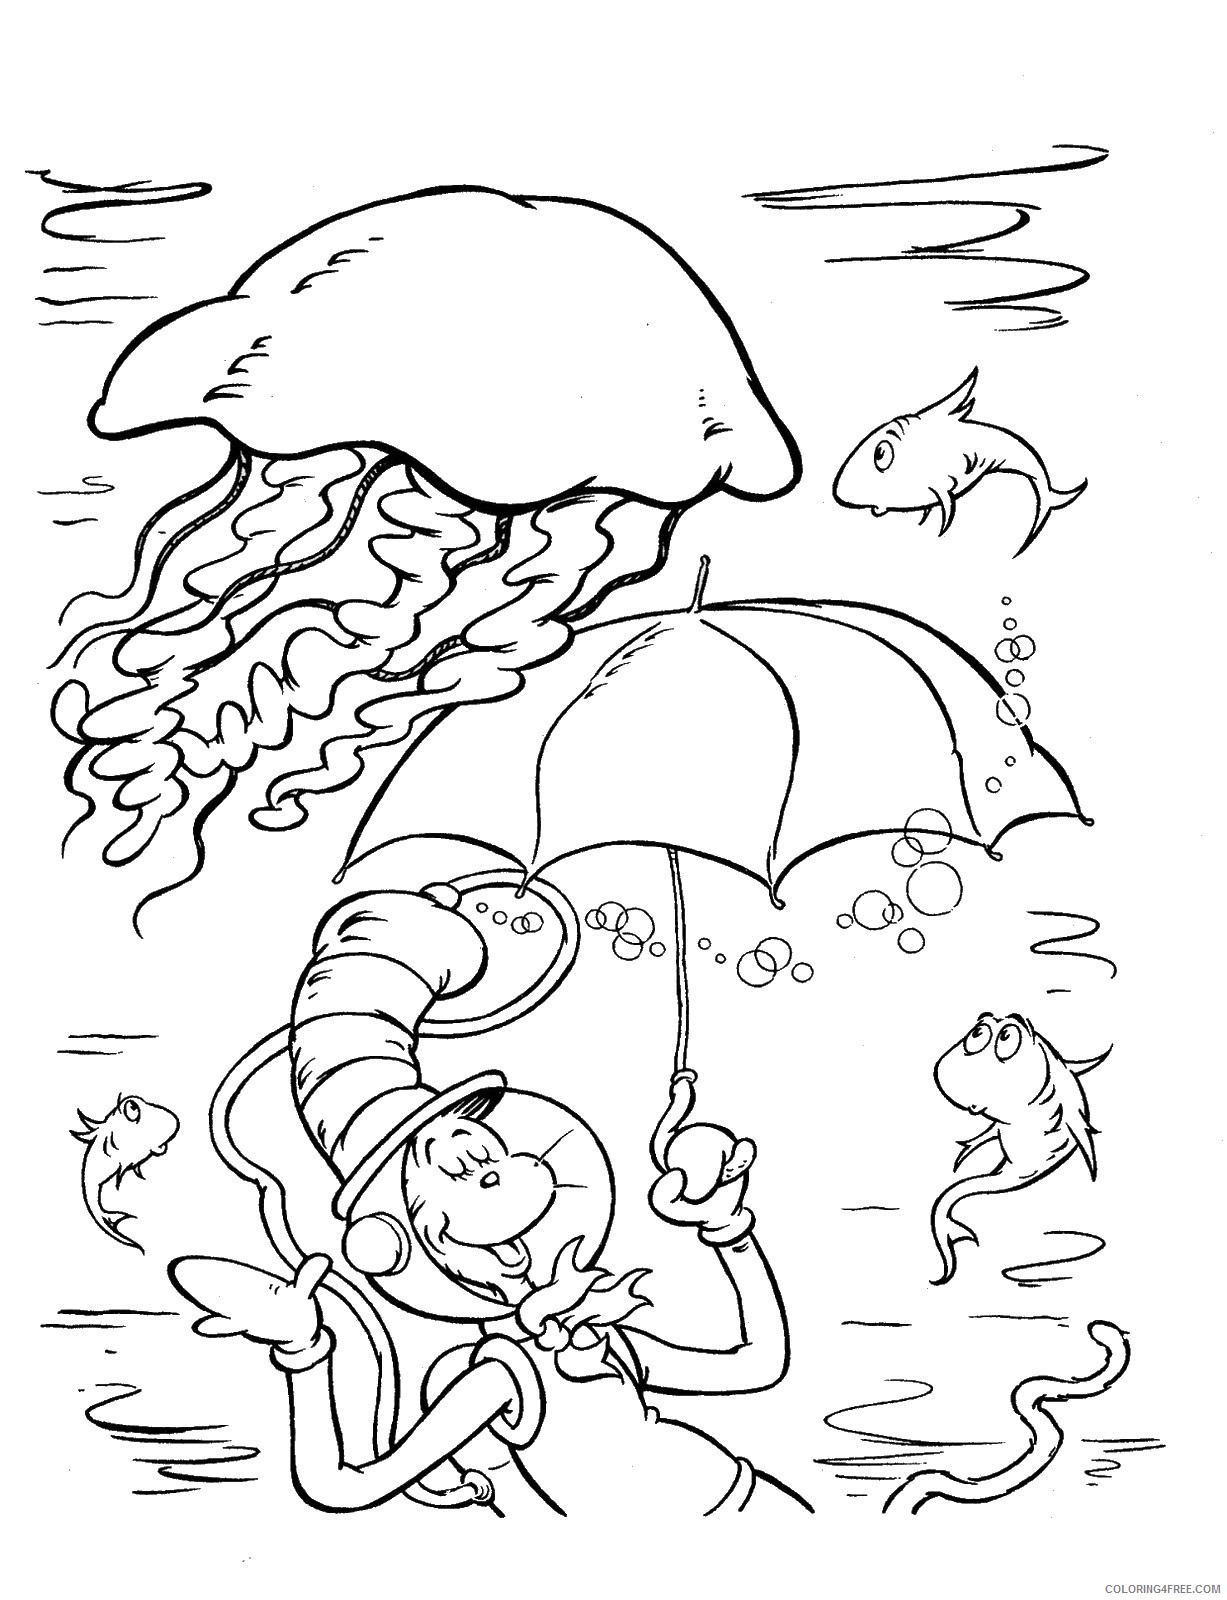 The Cat in the Hat Coloring Pages Cartoons cat_hat_cl_16 Printable 2020 6379 Coloring4free